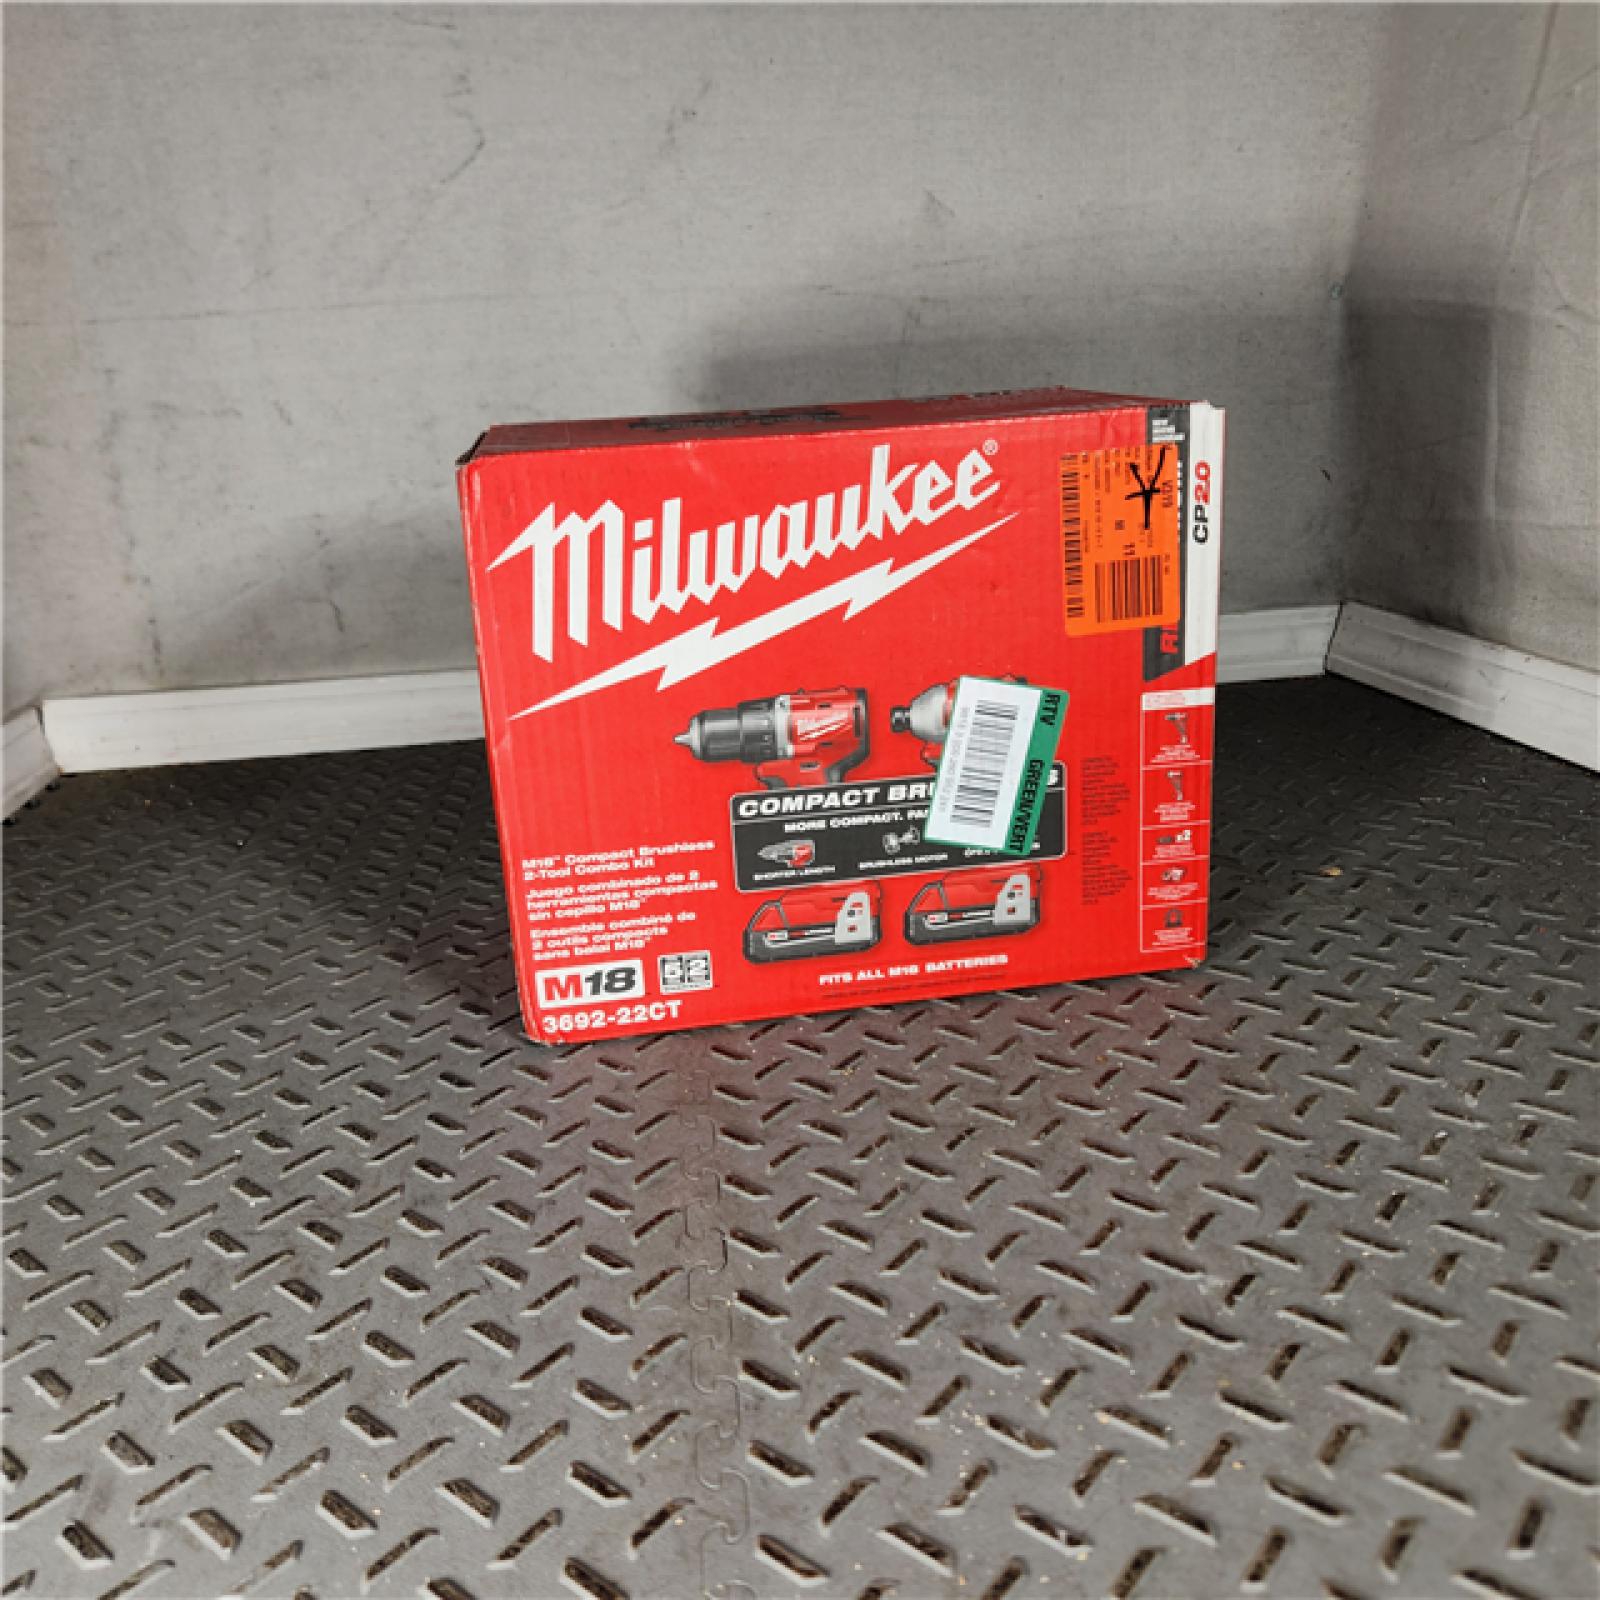 Houston Location - As-Is Milwaukee 3692-22CT 18V M18 Lithium-Ion Compact Brushless Cordless 2-Tool Combo Kit with 1/2 Drill/Driver and 1/4 Hex Impact Driver 2.0 Ah - Appears IN GOOD Condition